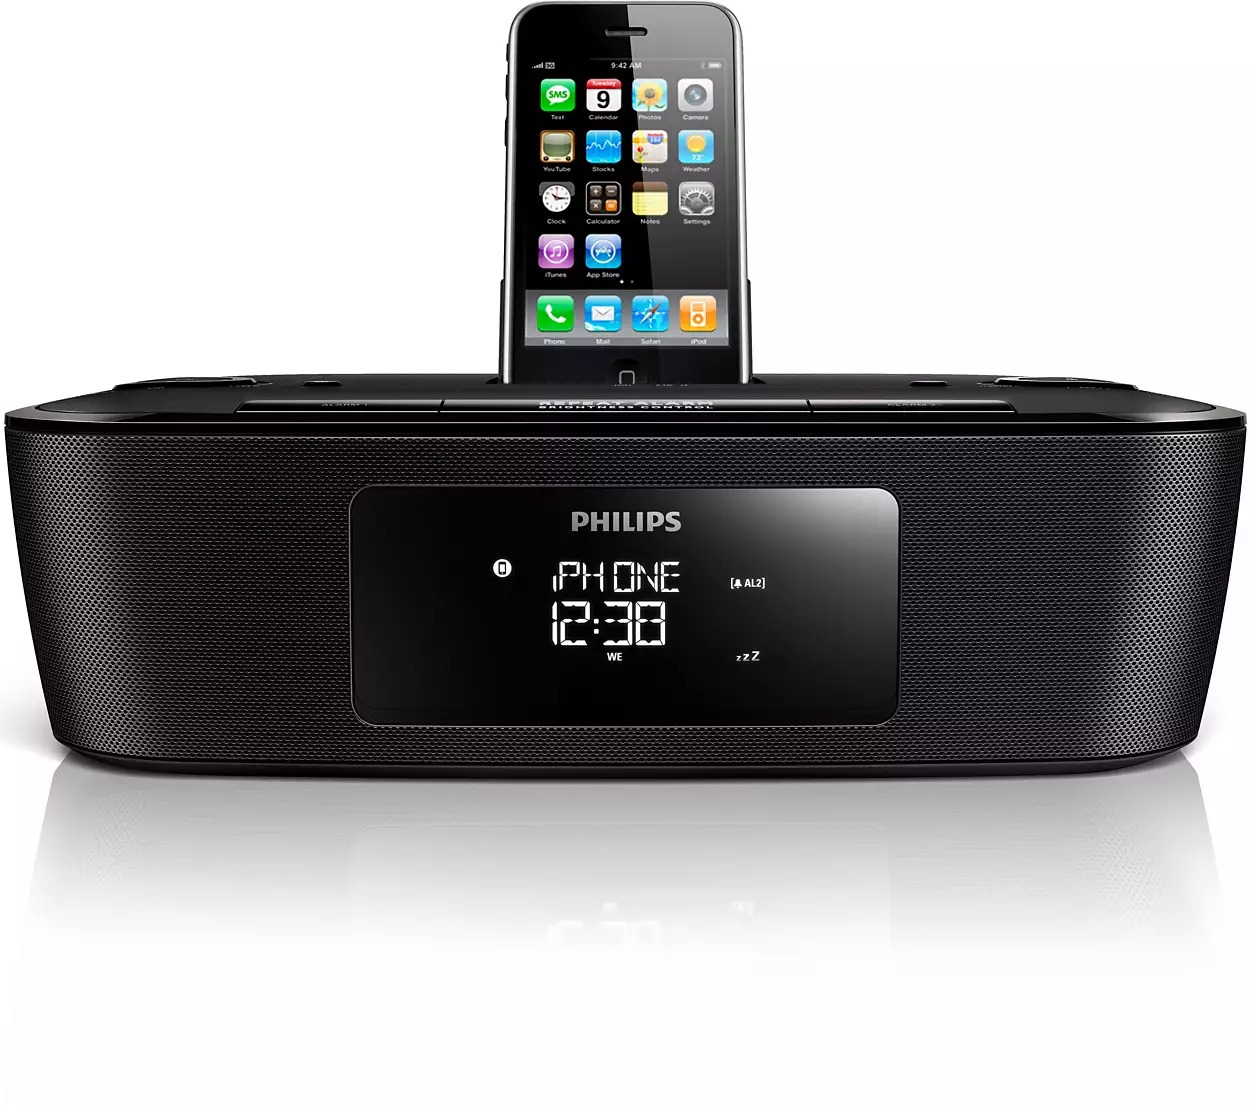 Connecting Haier IPod Docking Station To TV: A Comprehensive Guide